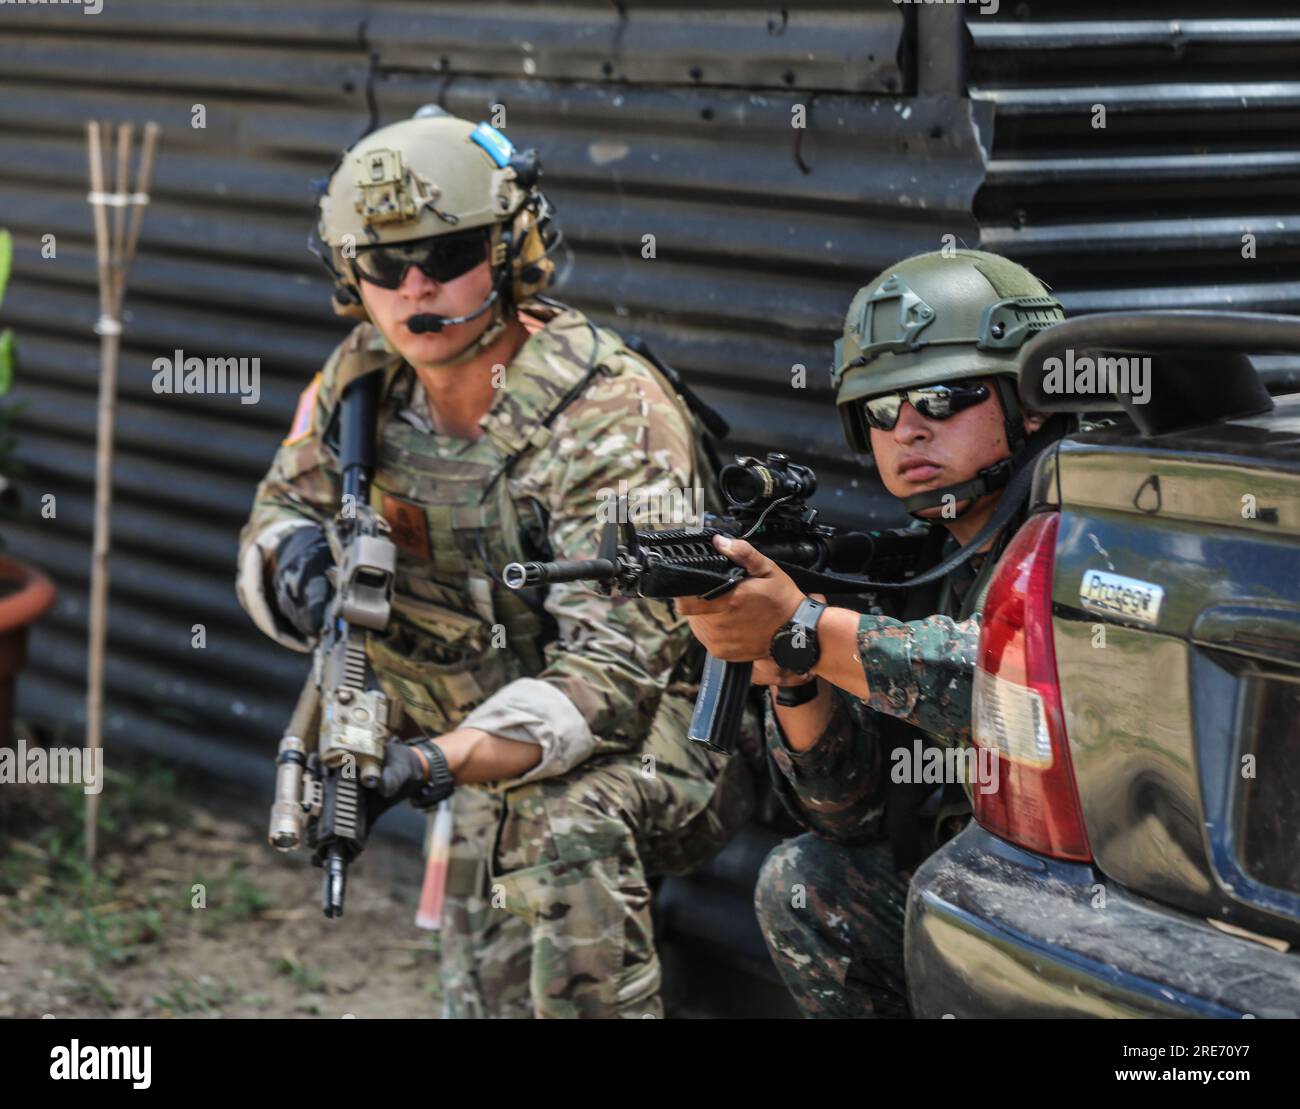 Green beret from 7th Special Forces Group (Airborne) and Guatemalan soldier  pull security at an objective location for the full Mission Profile, during  CENTAM Guardian 23 in El Cerinal, Guatemala on March